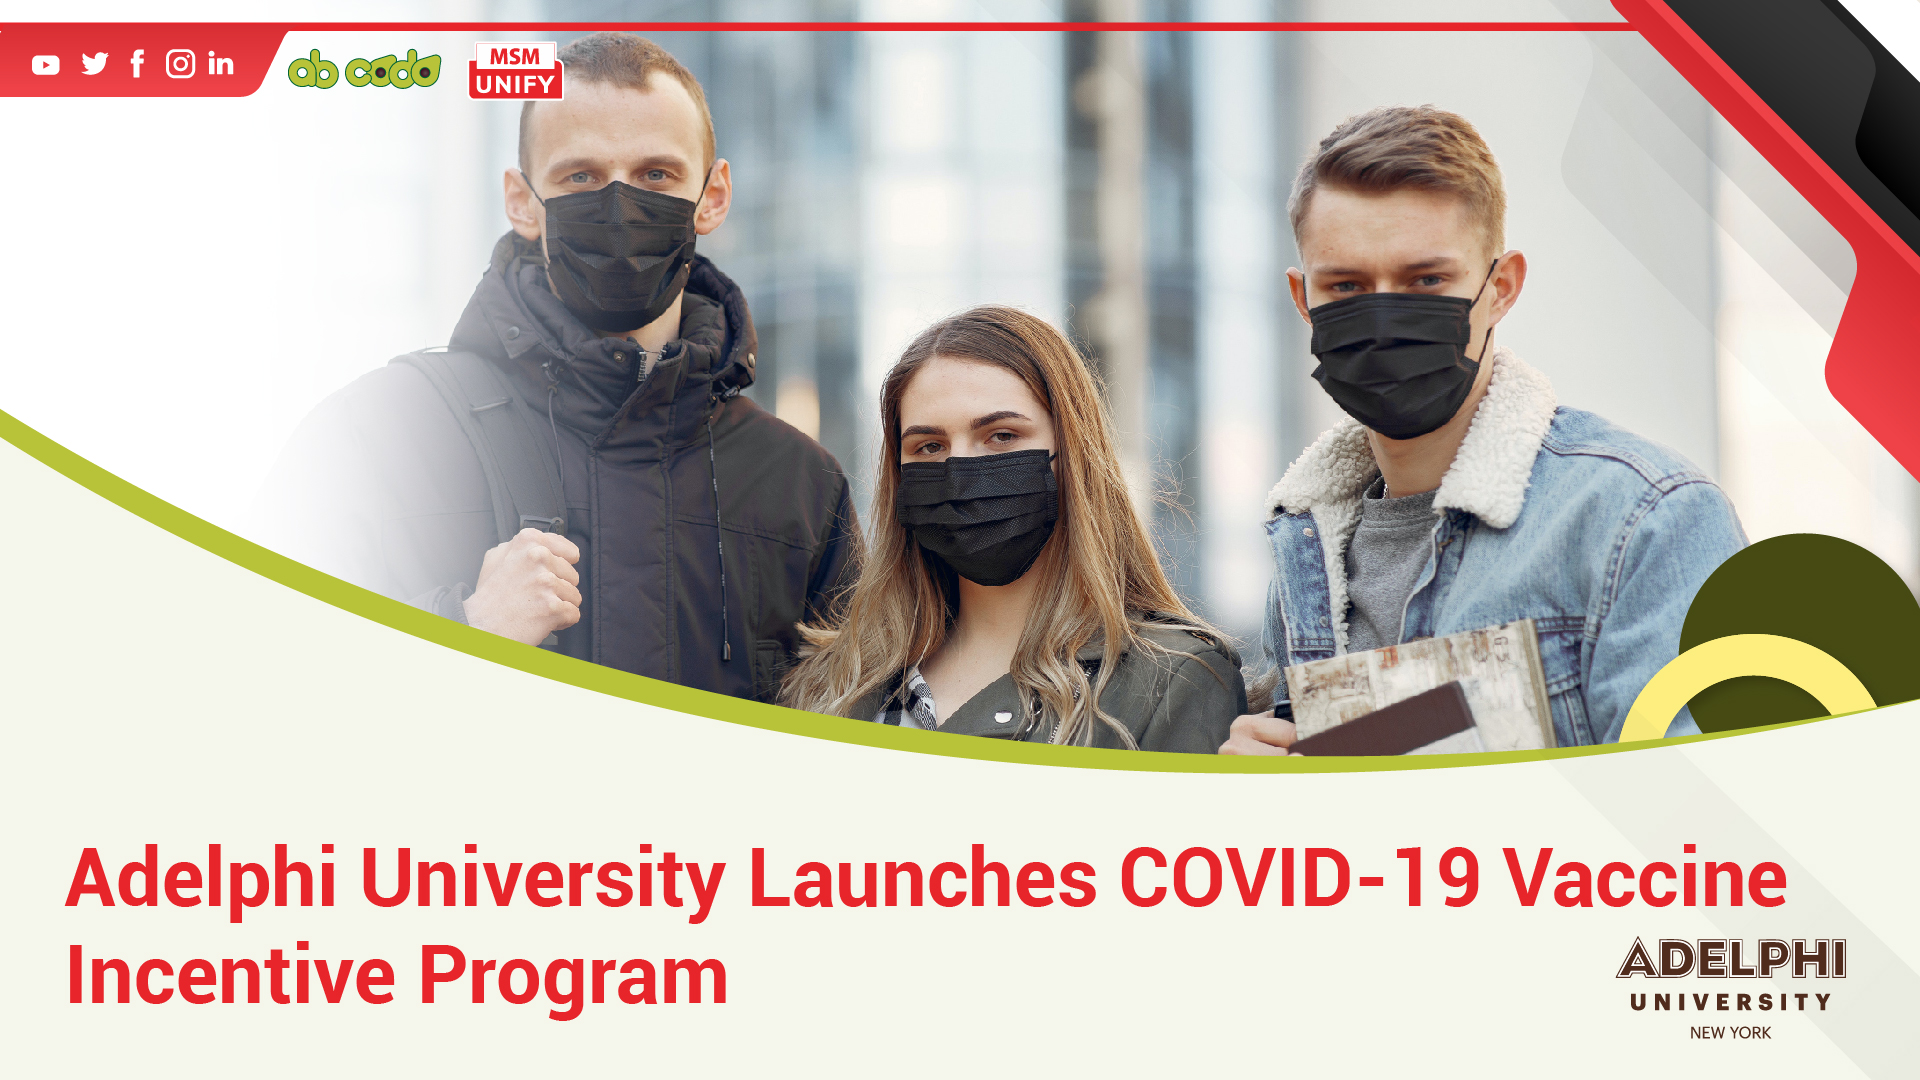 adelphi university states that they will provide covid19 vaccine